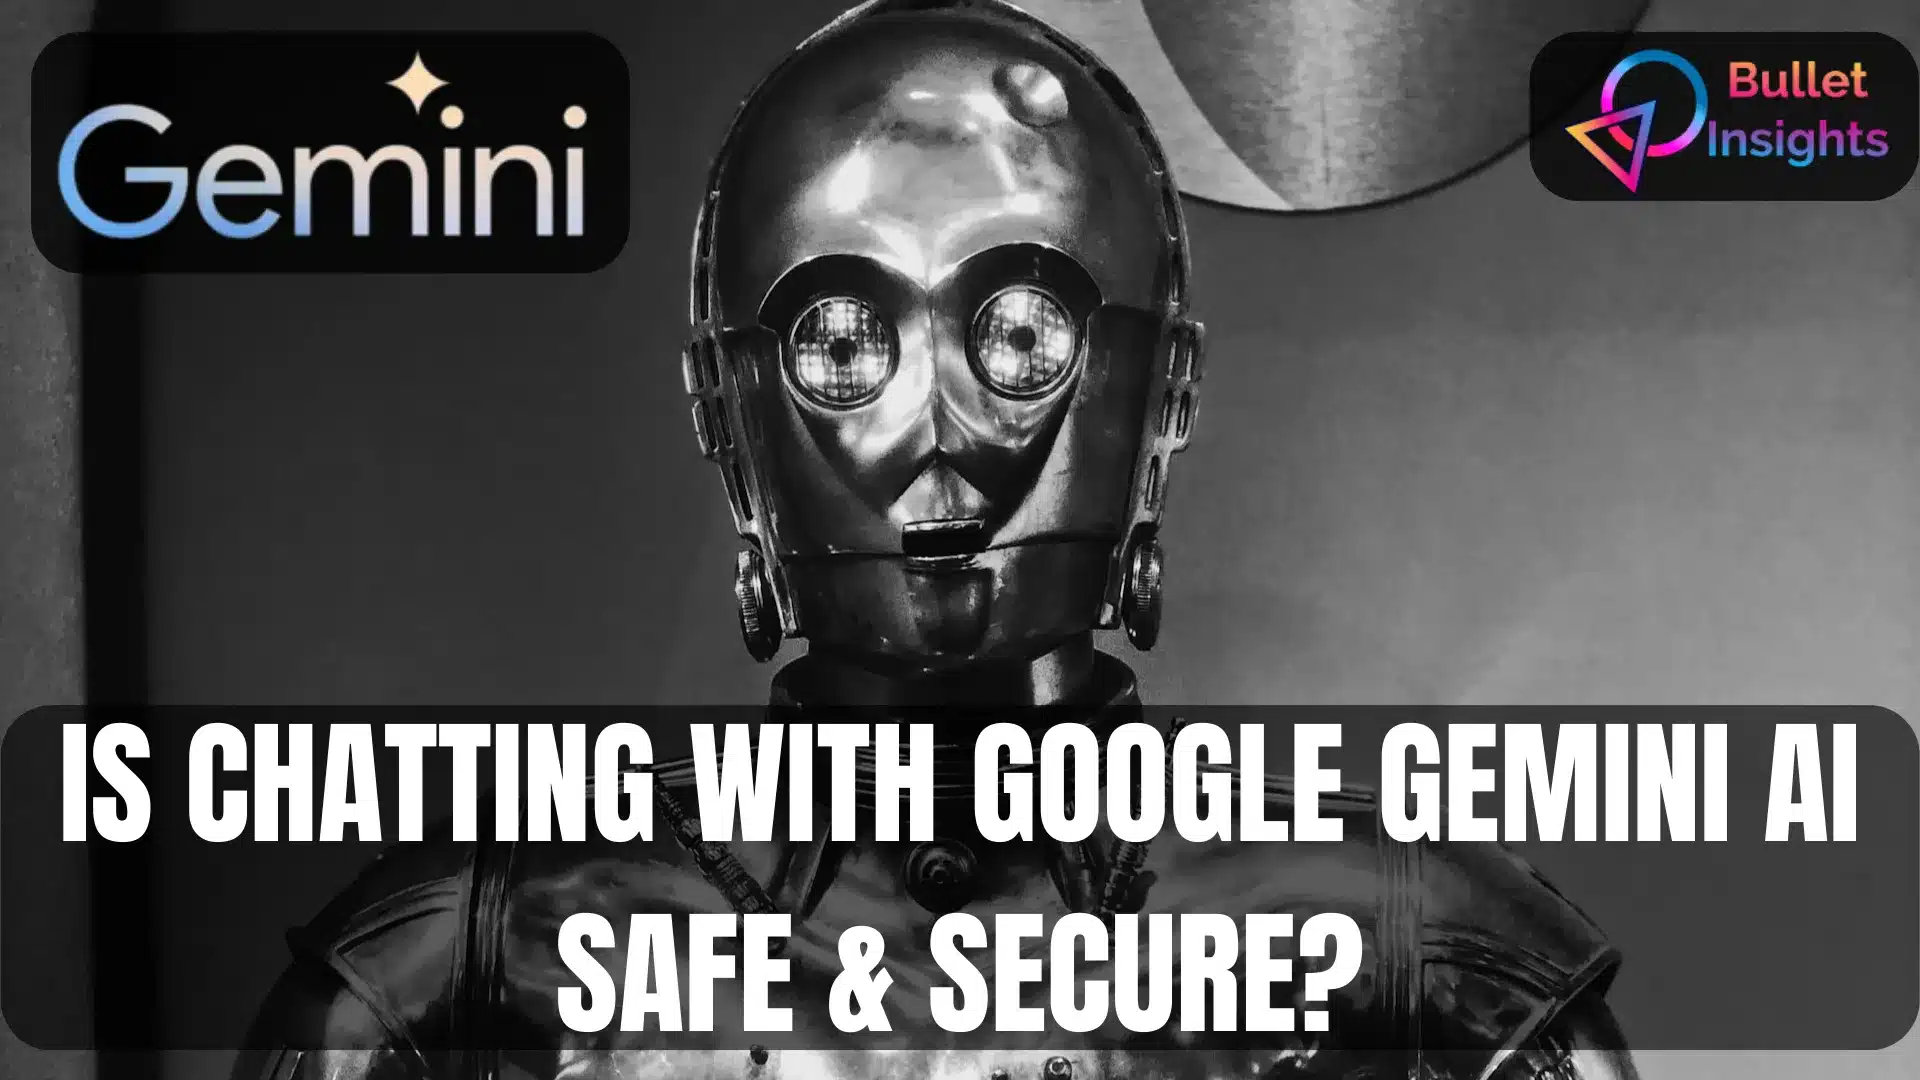 Is Chatting with Google Gemini AI Safe & Secure?